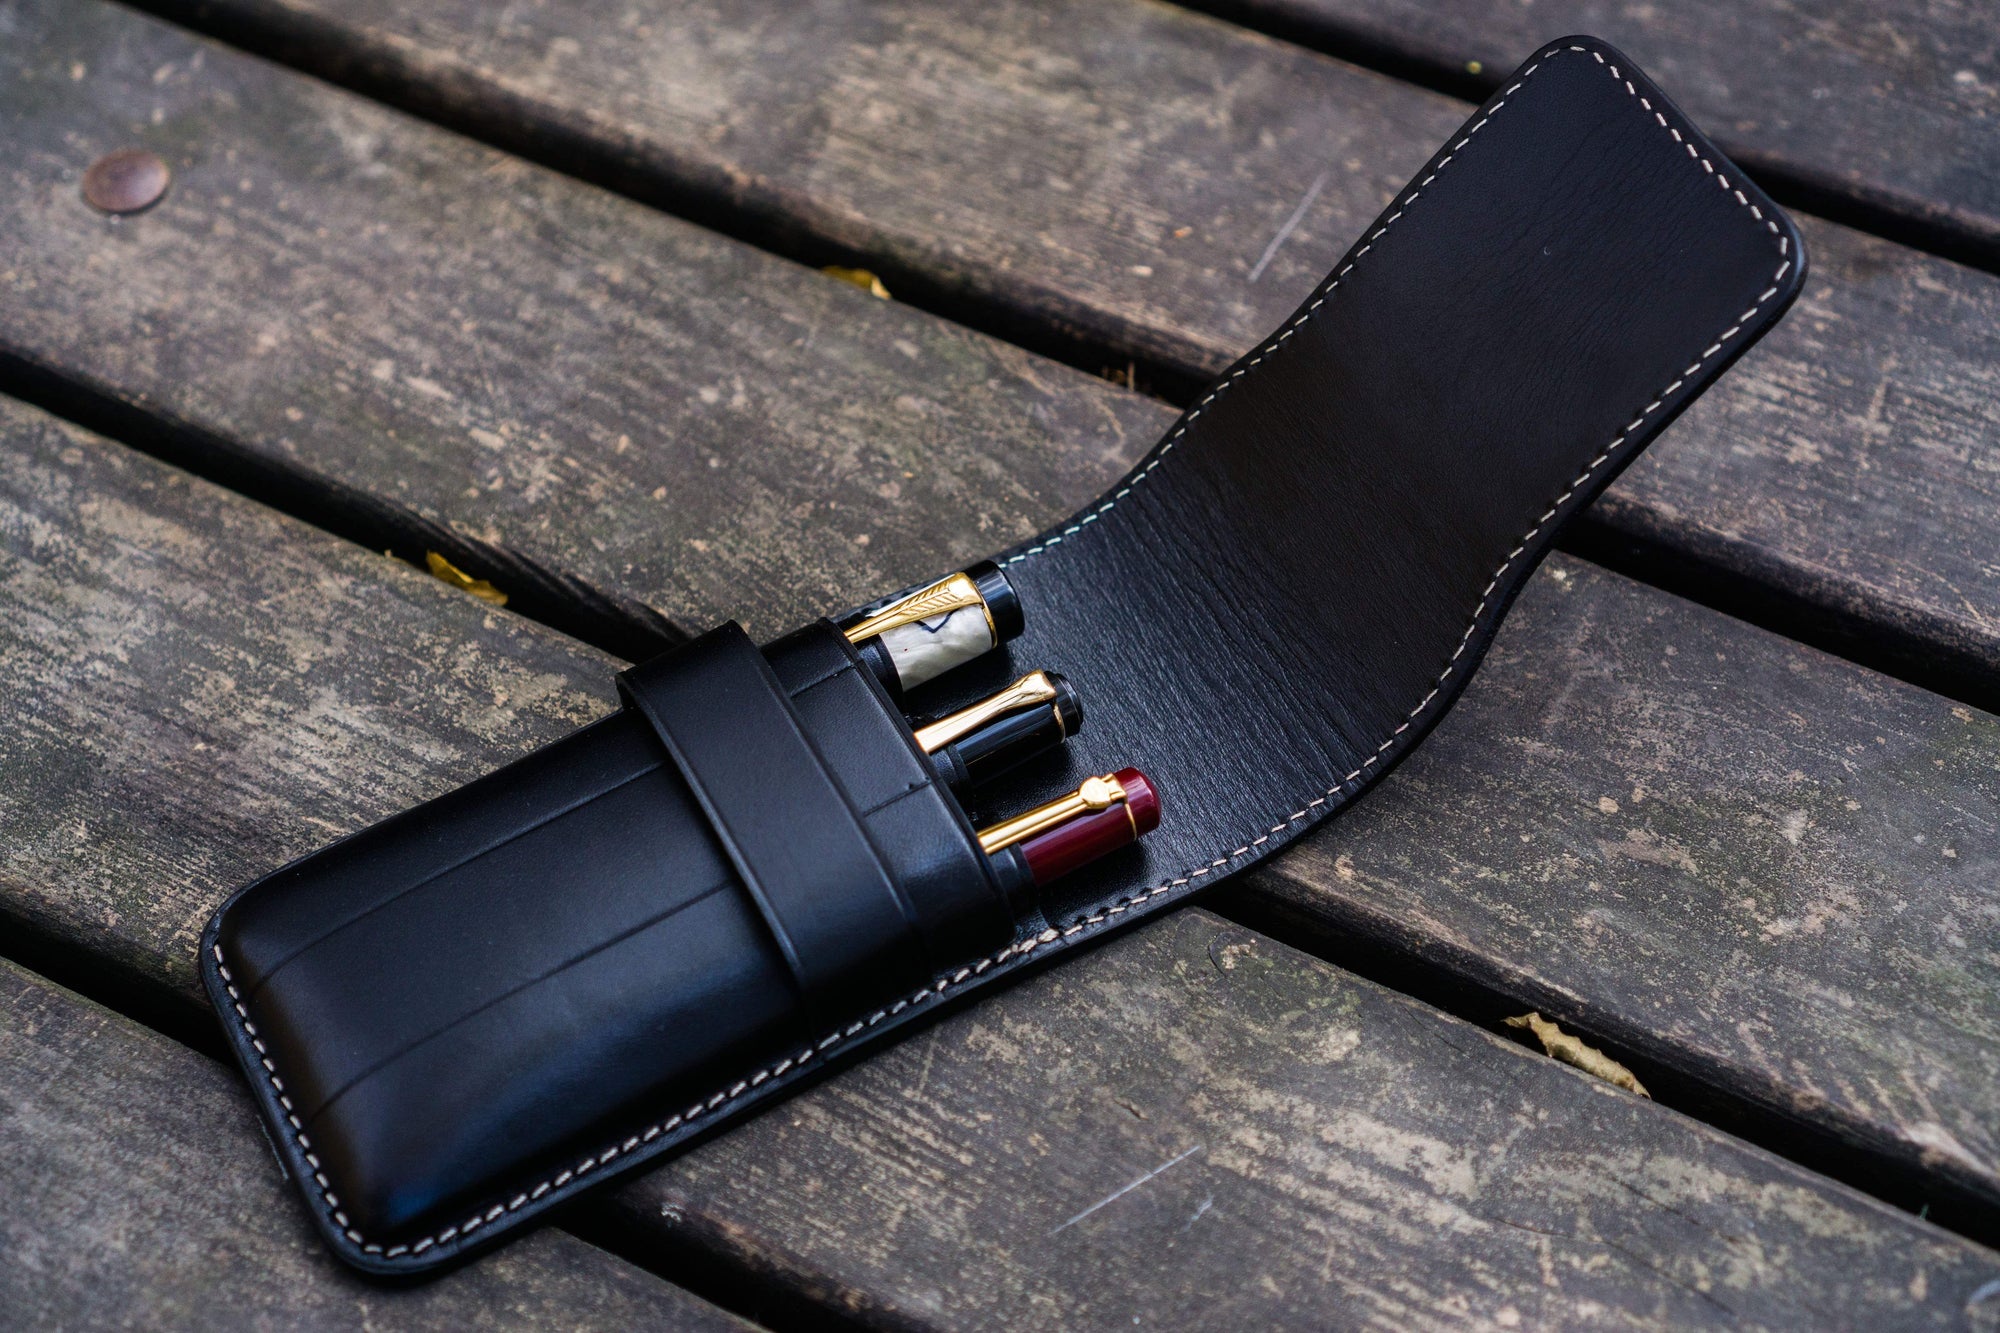 The Student Leather Pencil Case - Brown